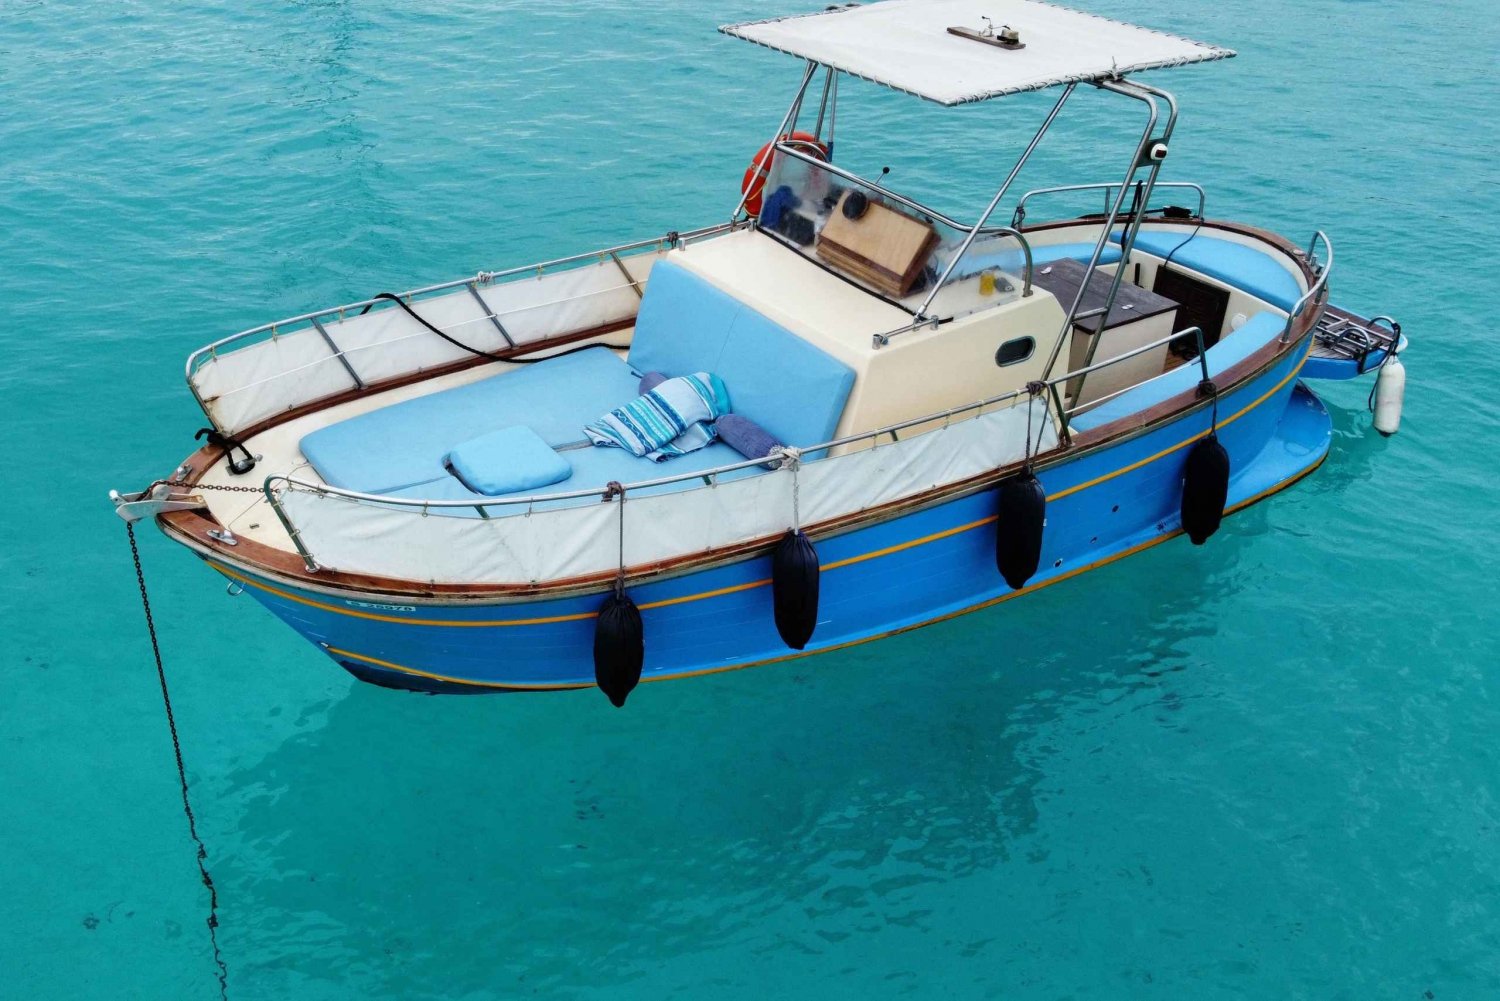 Malta, Gozo and Comino : Boat Charters -Day and Sunset Tours